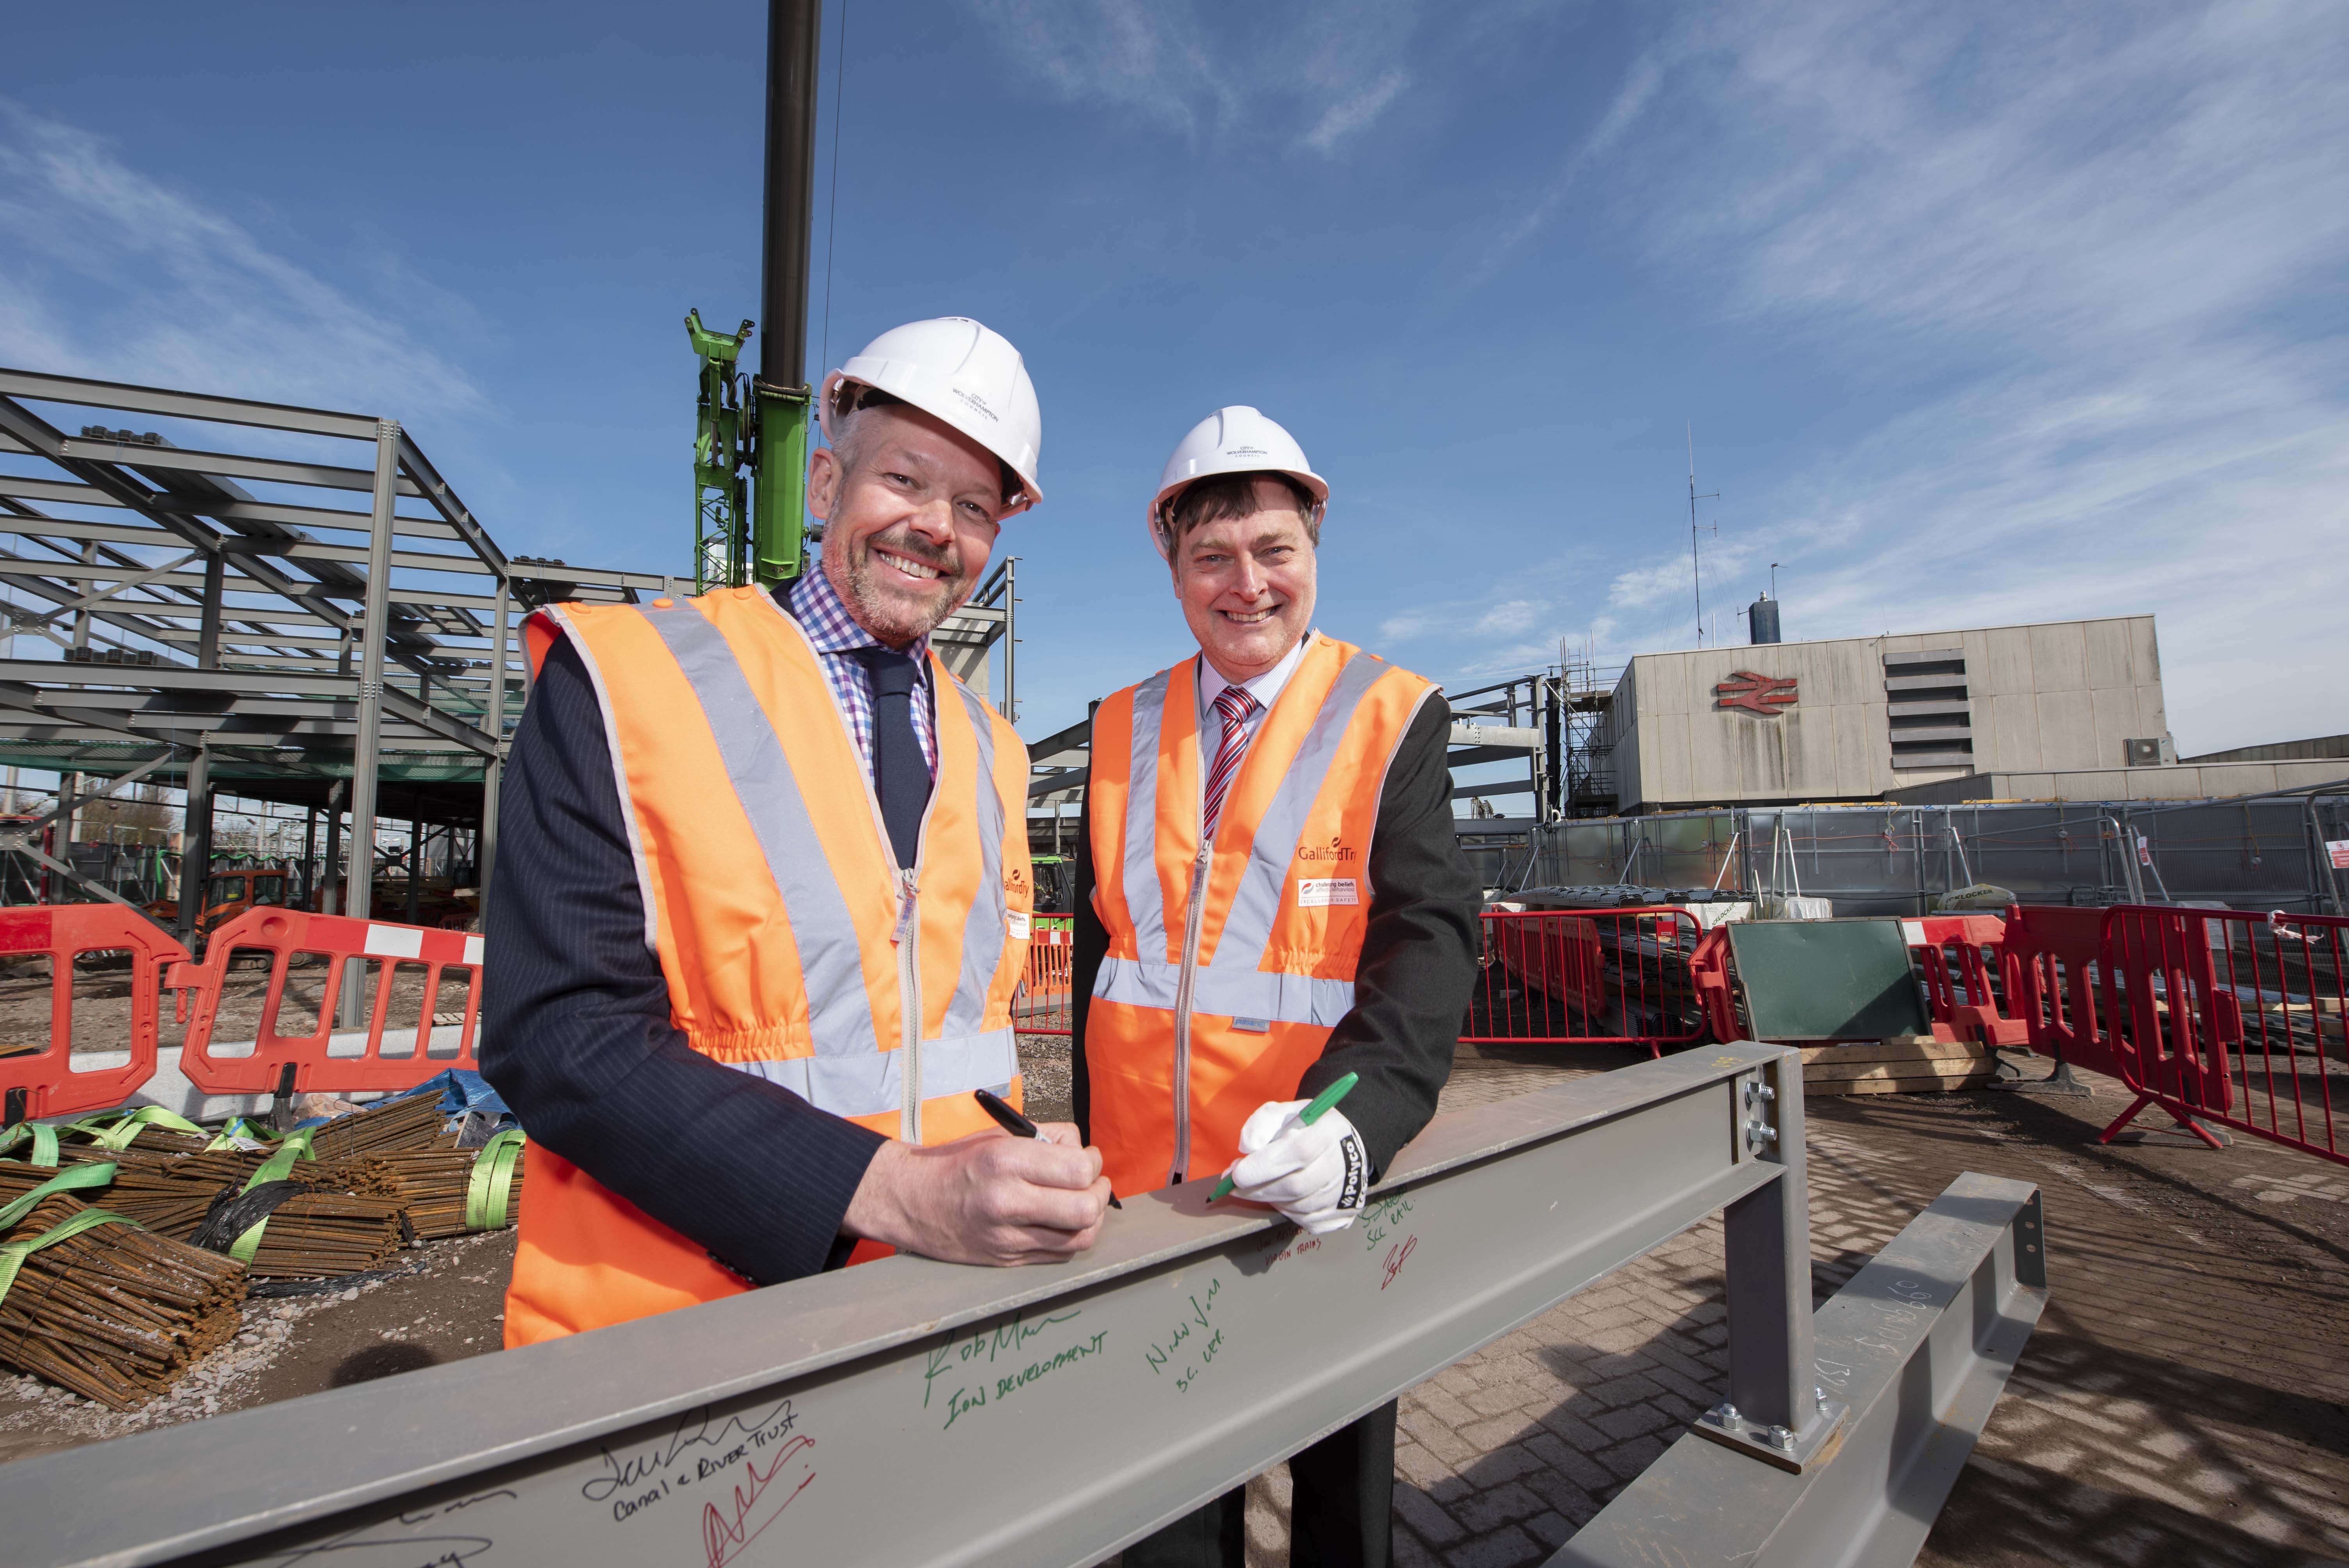 Malcolm Holmes (left), director of rail at Transport for West Midlands and Cllr John Reynolds, City of Wolverhampton's cabinet member for city economy, sign the steel rails that will form the structure of the new rail station